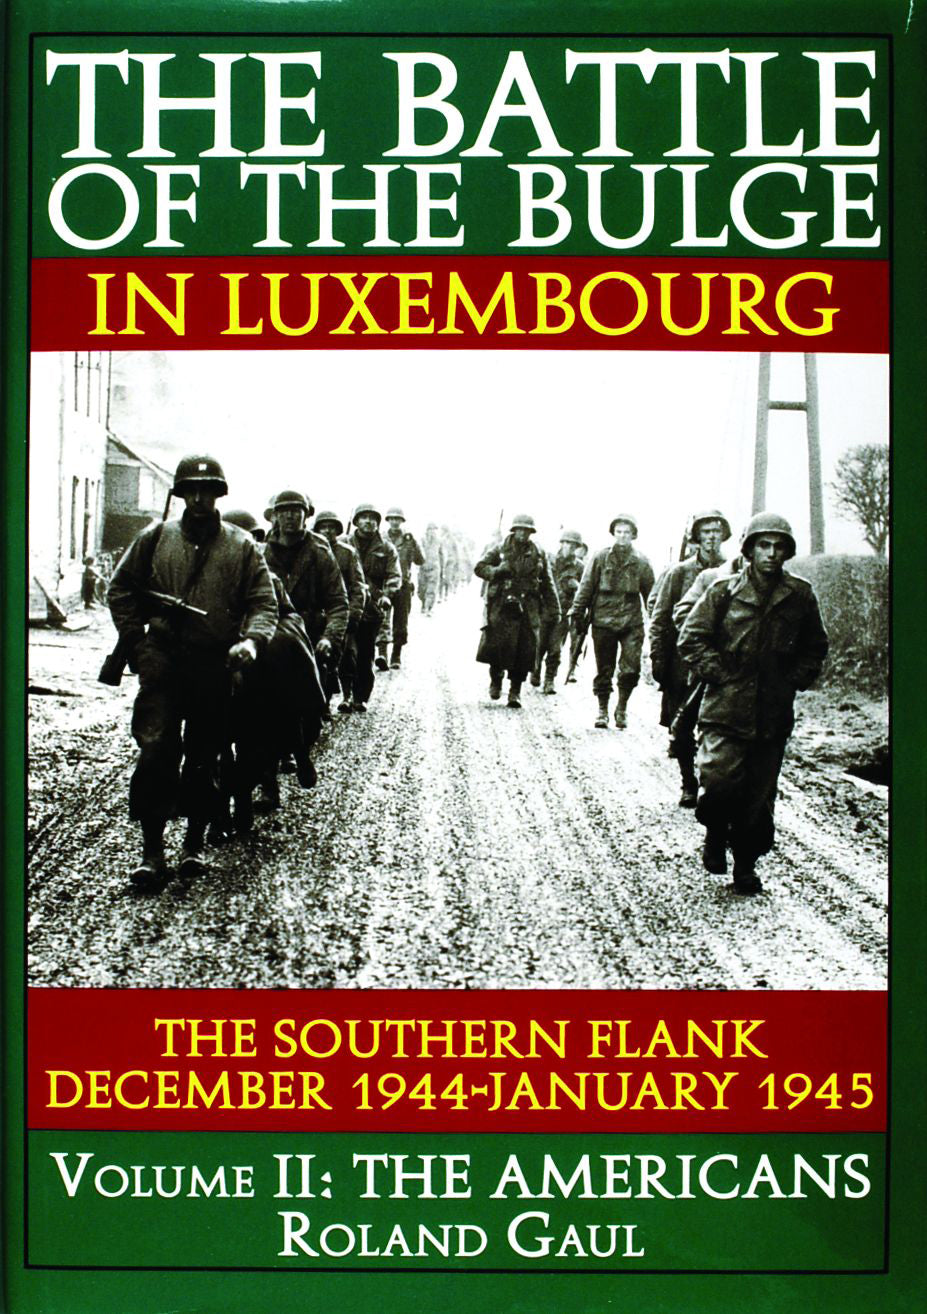 The Battle of the Bulge in Luxembourg Vol. 2